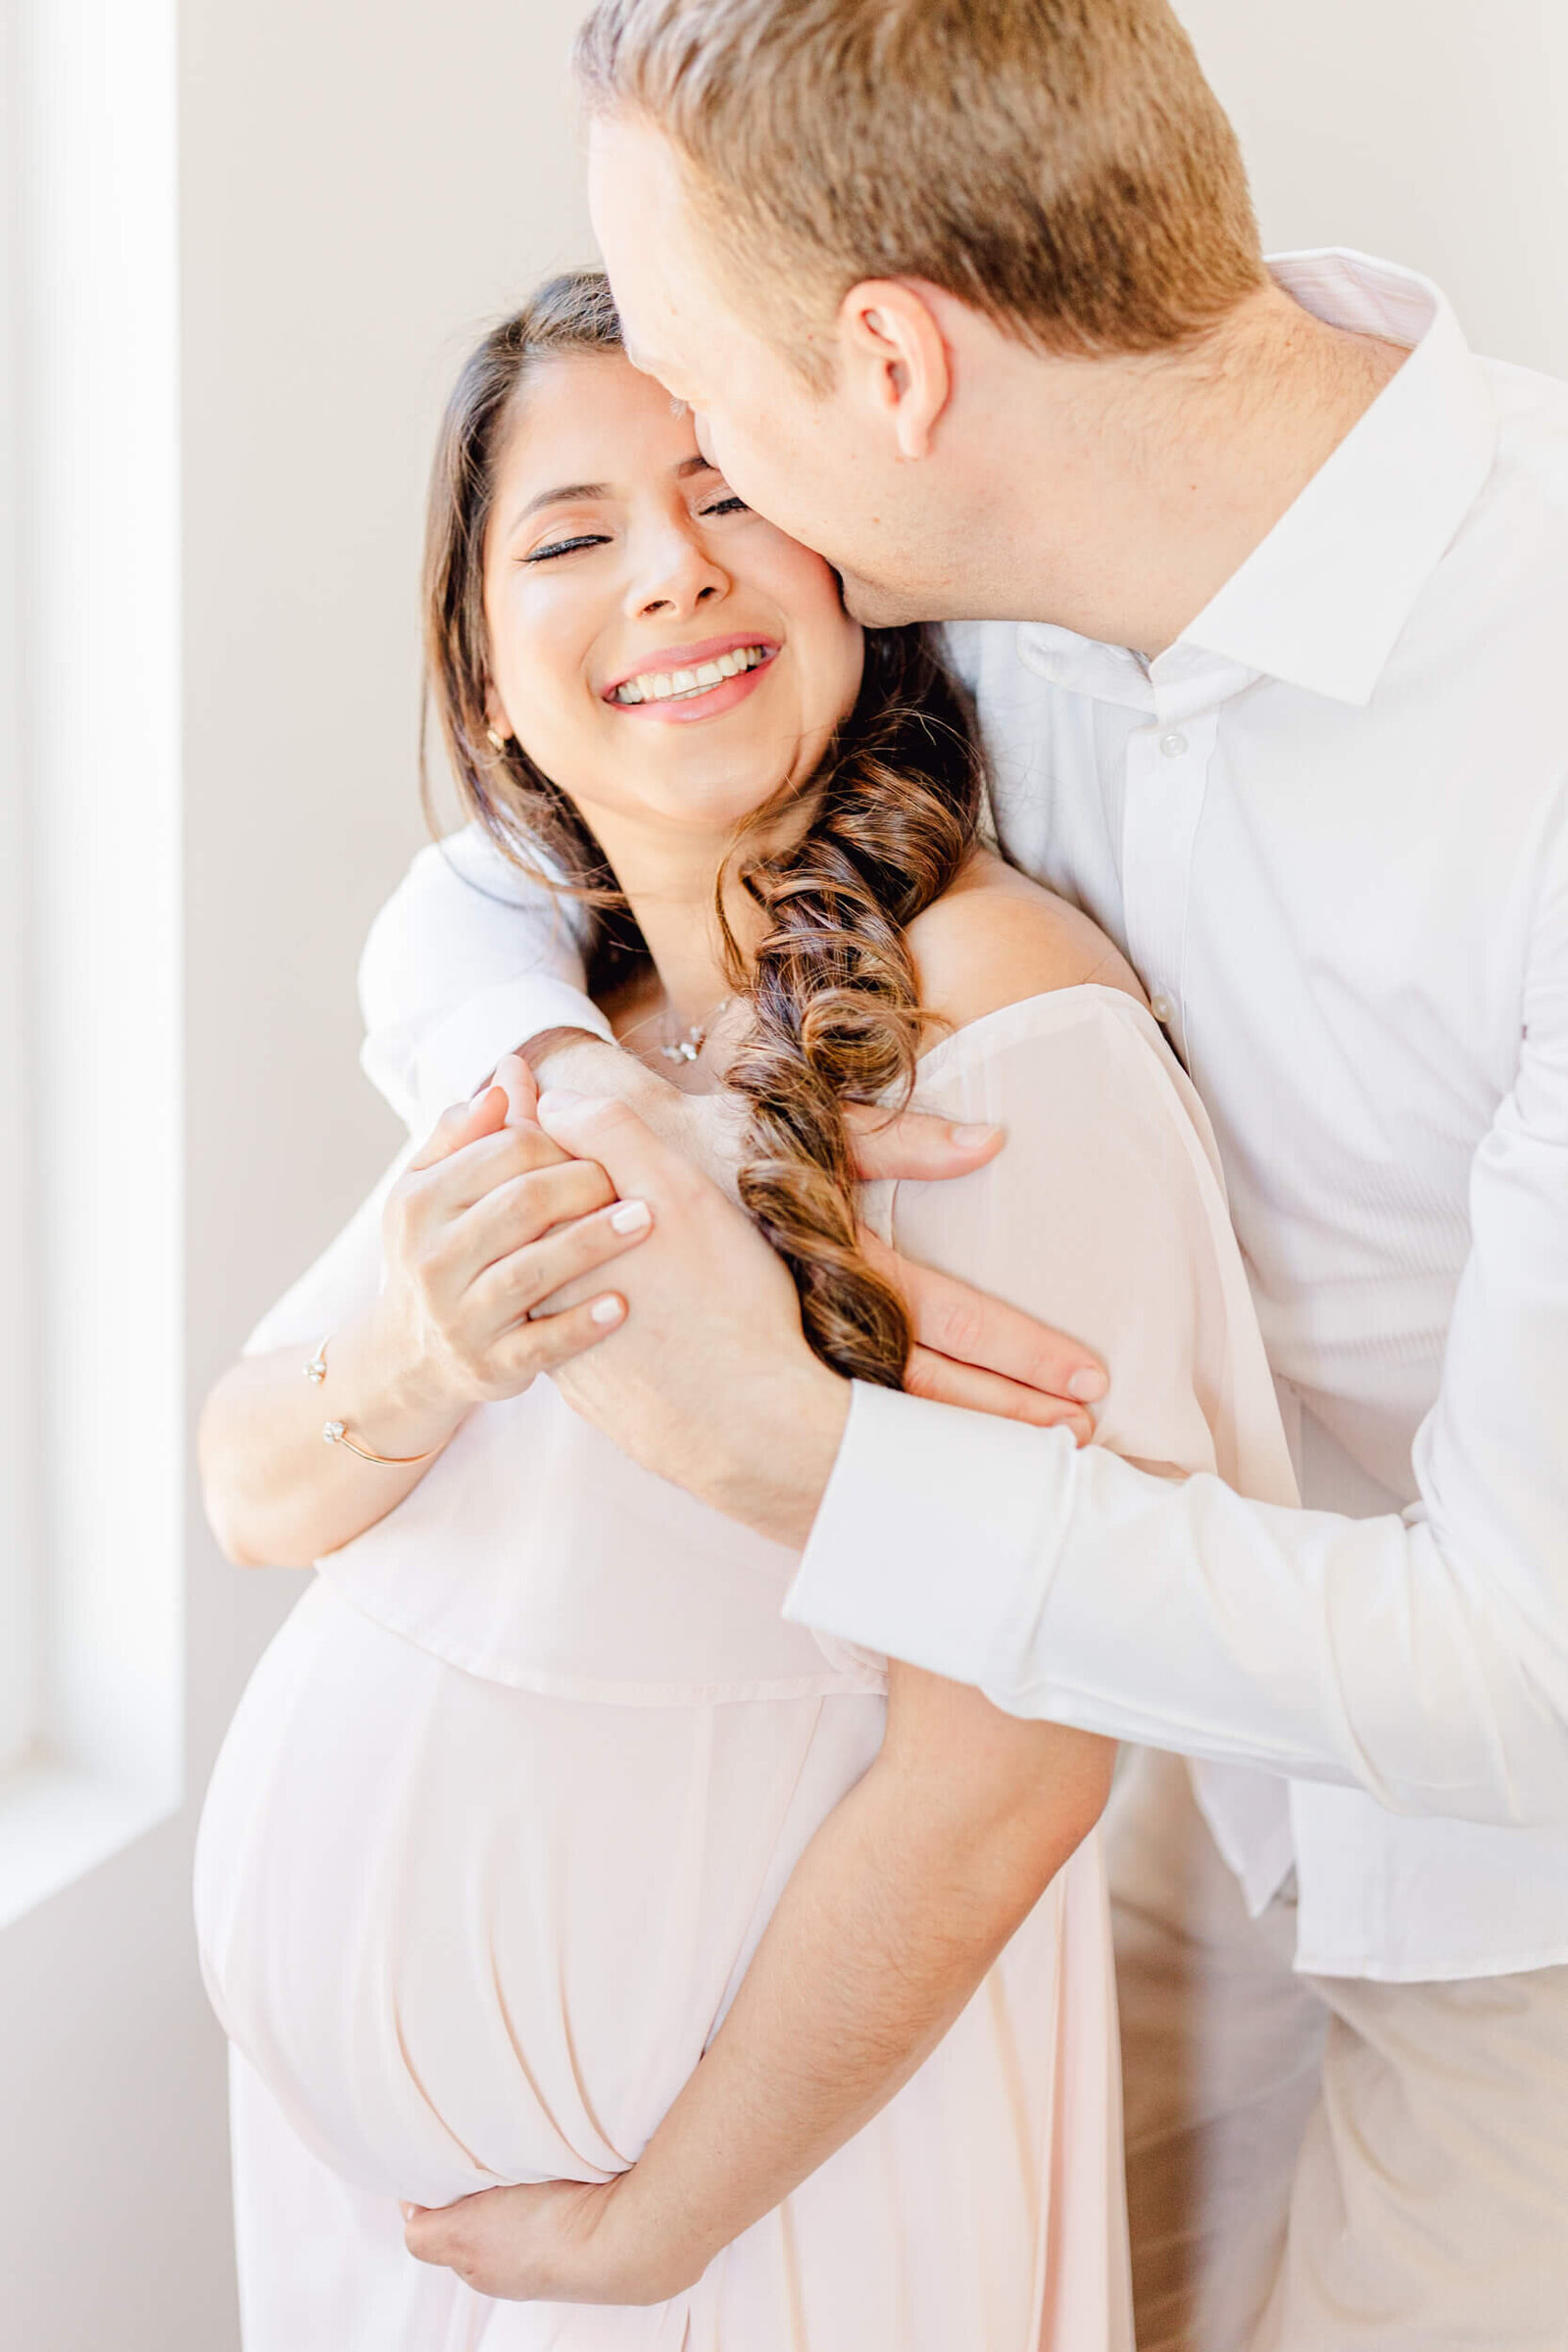 South-Boston-Maternity-Photographer-Featured-Gallery-4